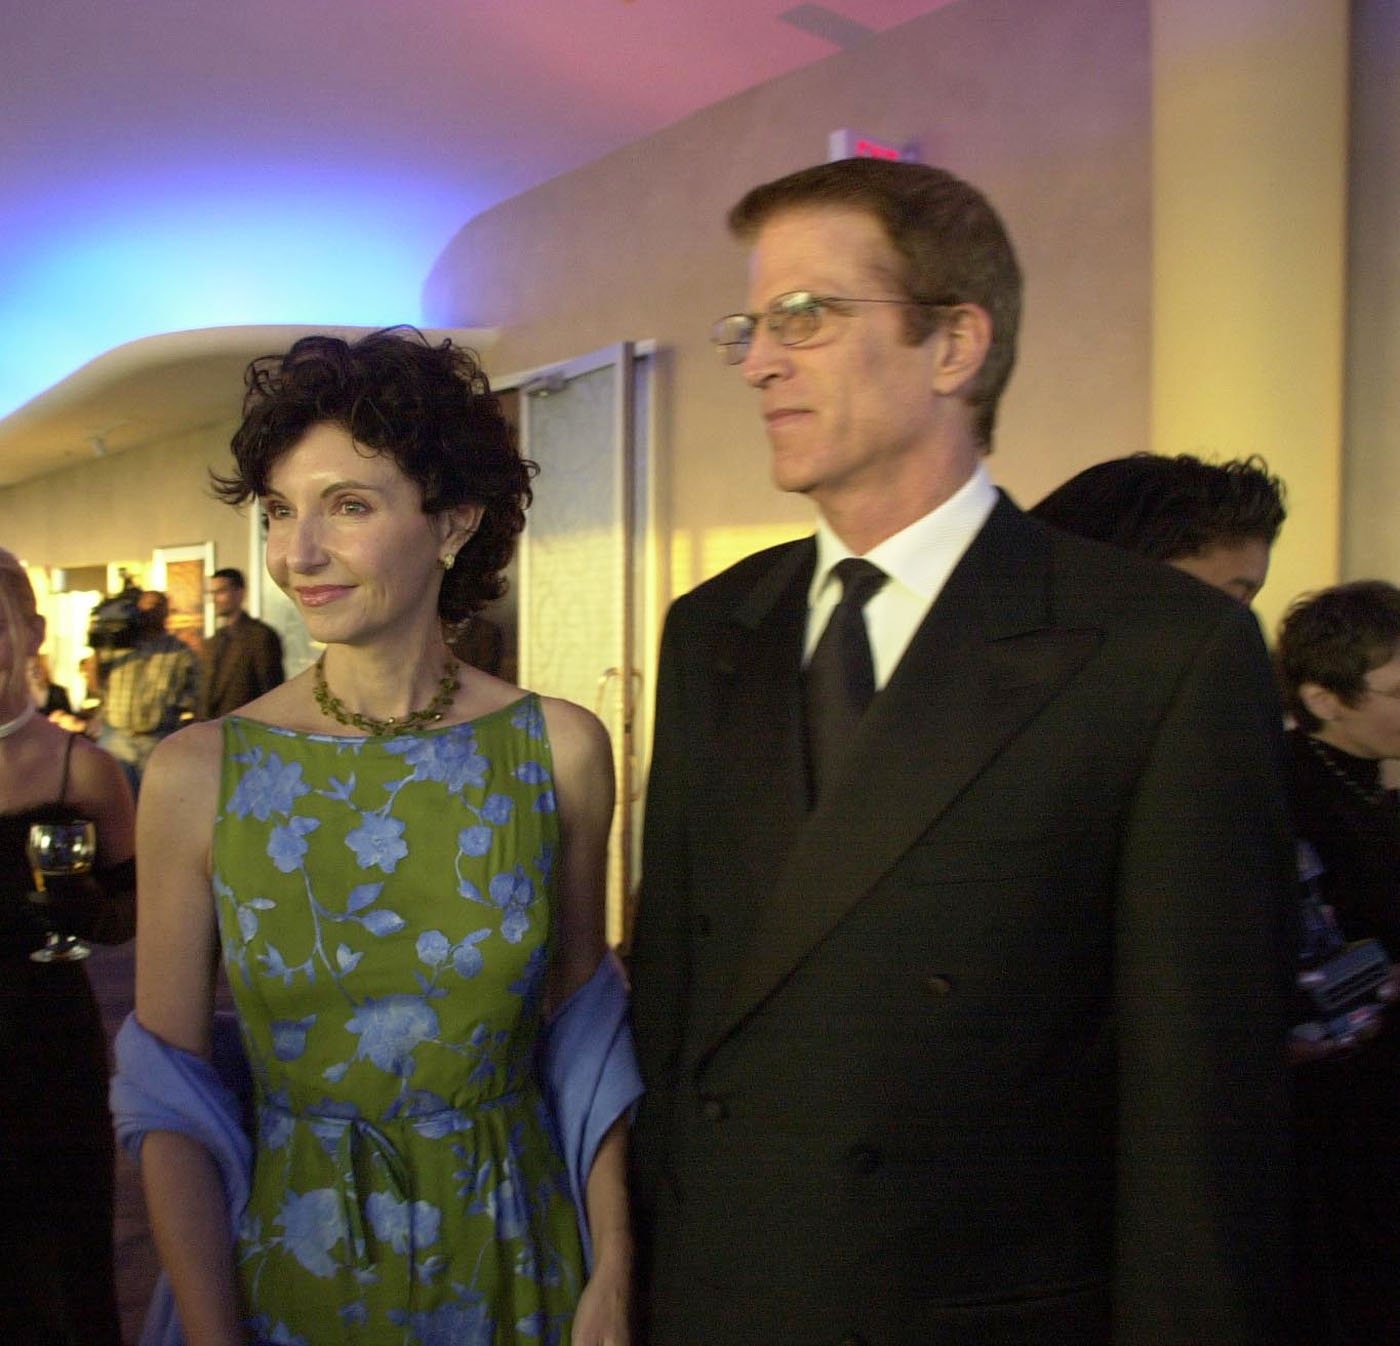 Mary Steenburgen and her husband Ted Danson during the Paraquad benefit at the Chase Park Plaza on April 29, 2000 in St. Louis, Missouri. / Source: Getty Images